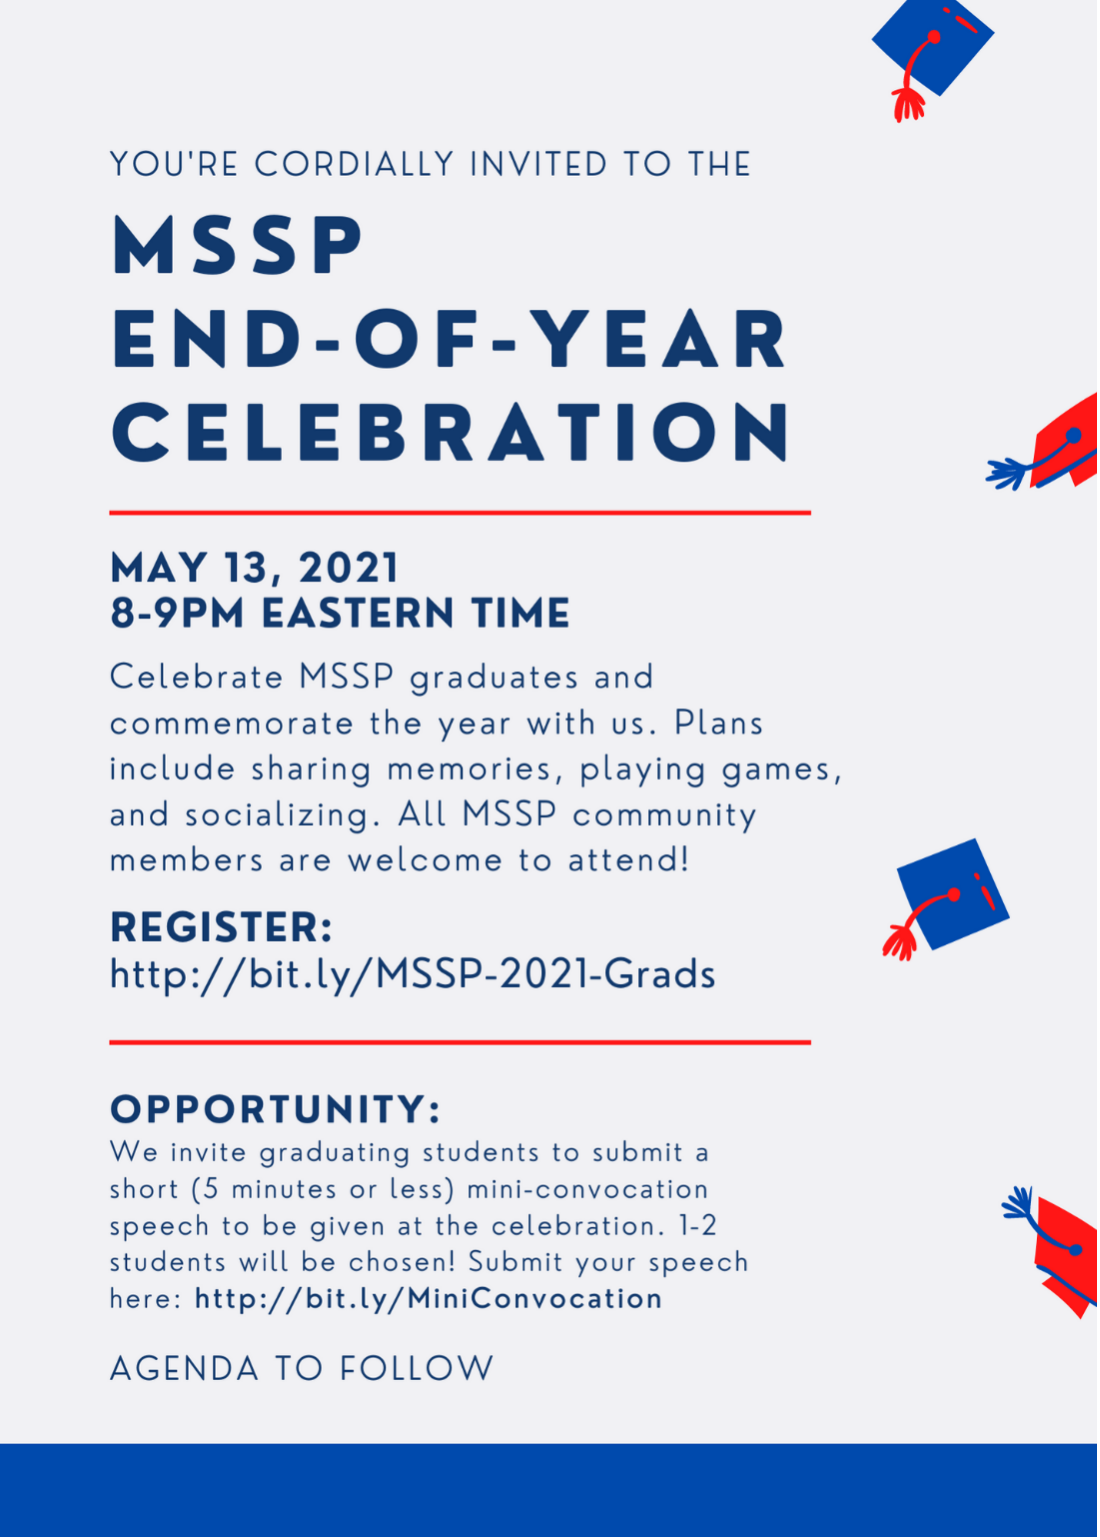 event flyer for the MSSP end-of-year celebration